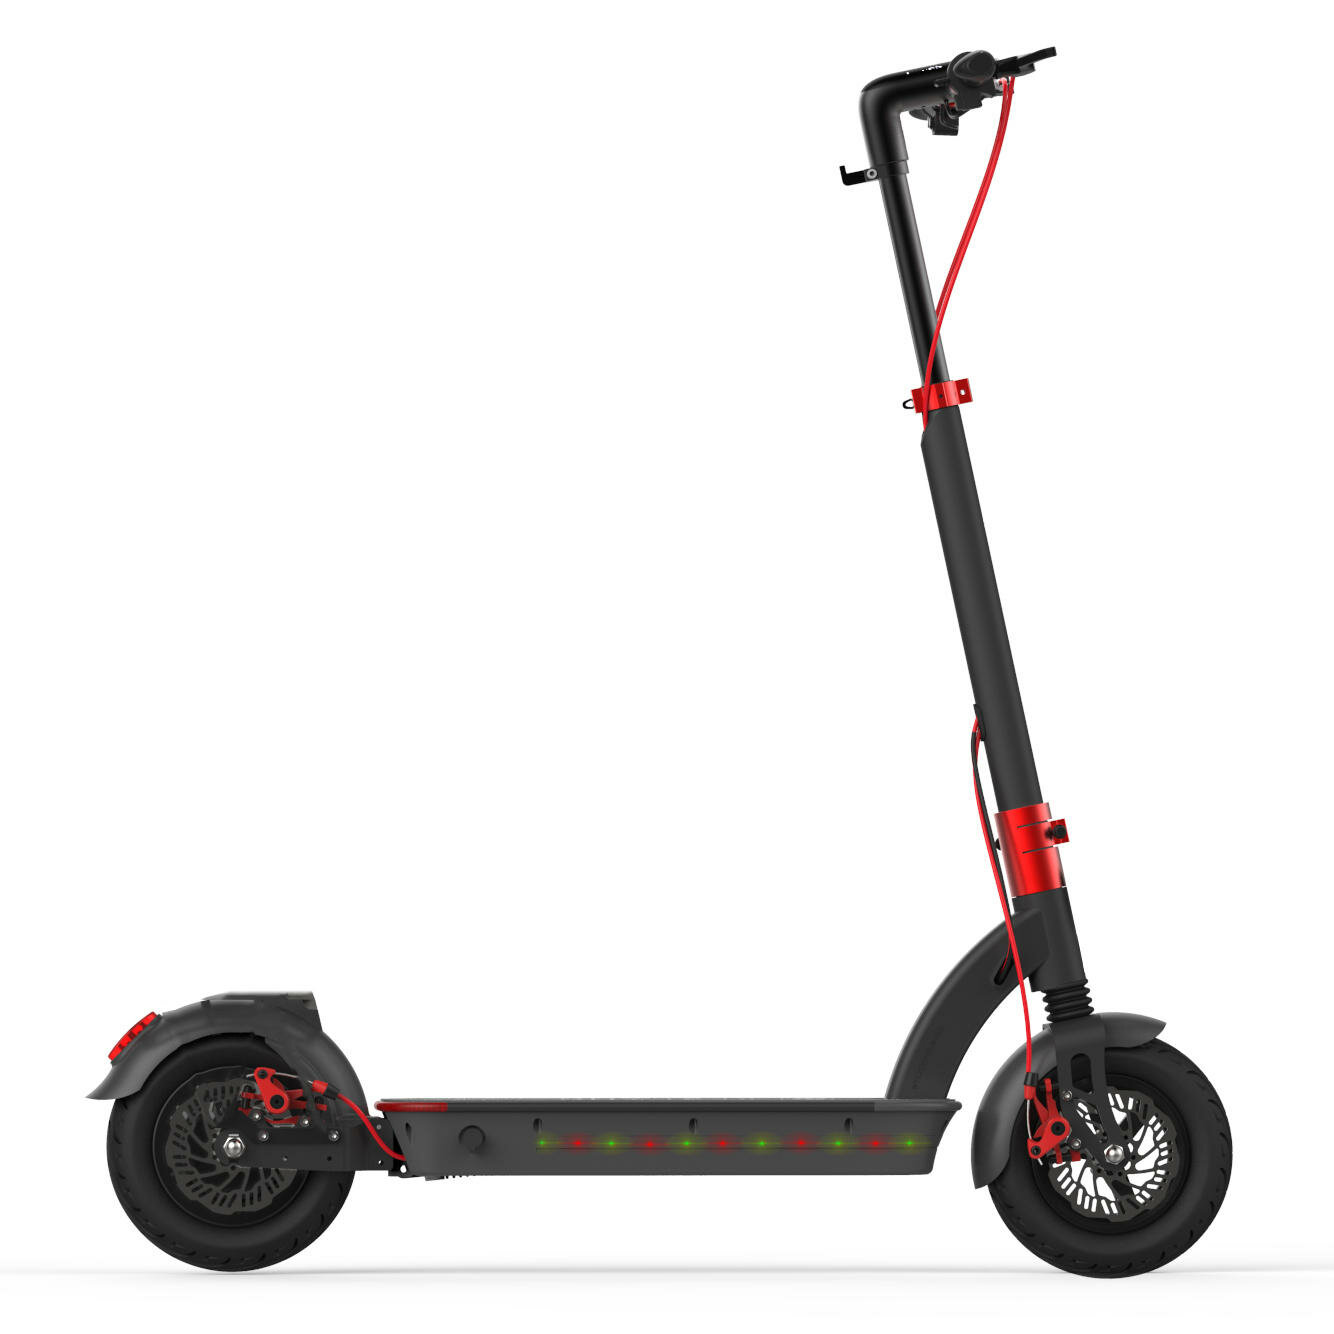 best price,aerlang,h6,v2,48v,500w,17.5a,electric,scooter,eu,discount